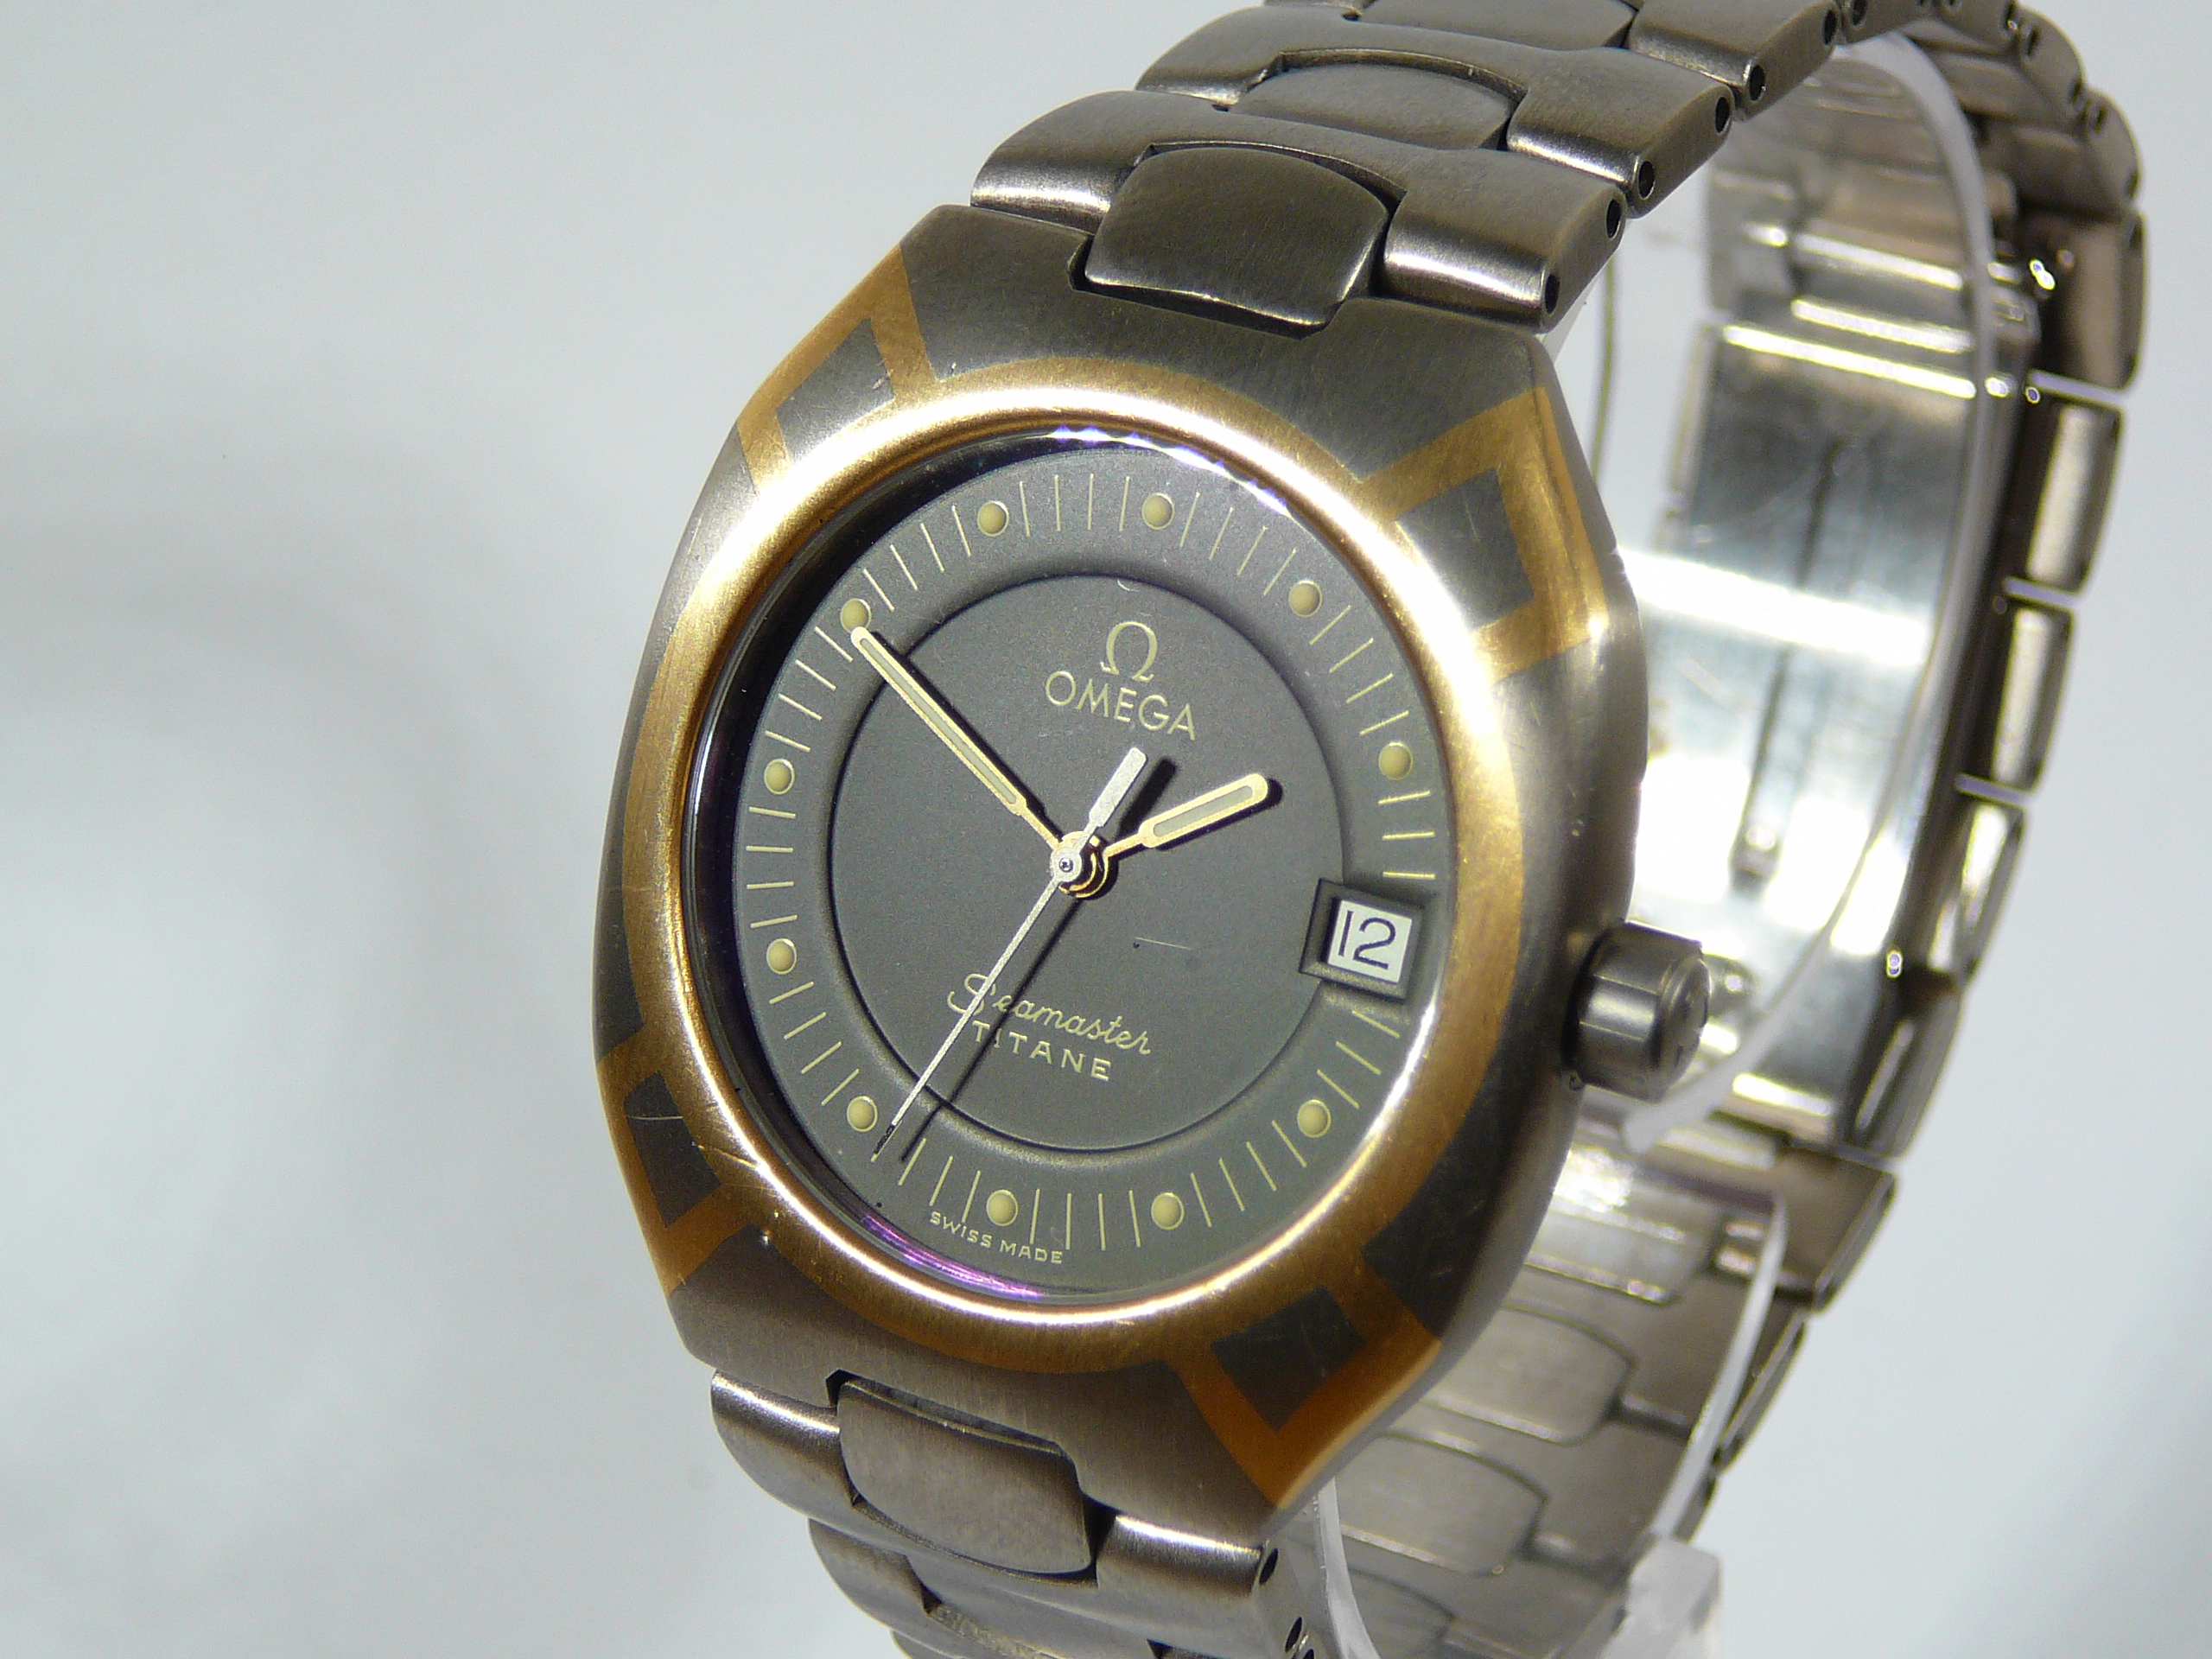 Gents Omega Wrist Watch - Image 2 of 2